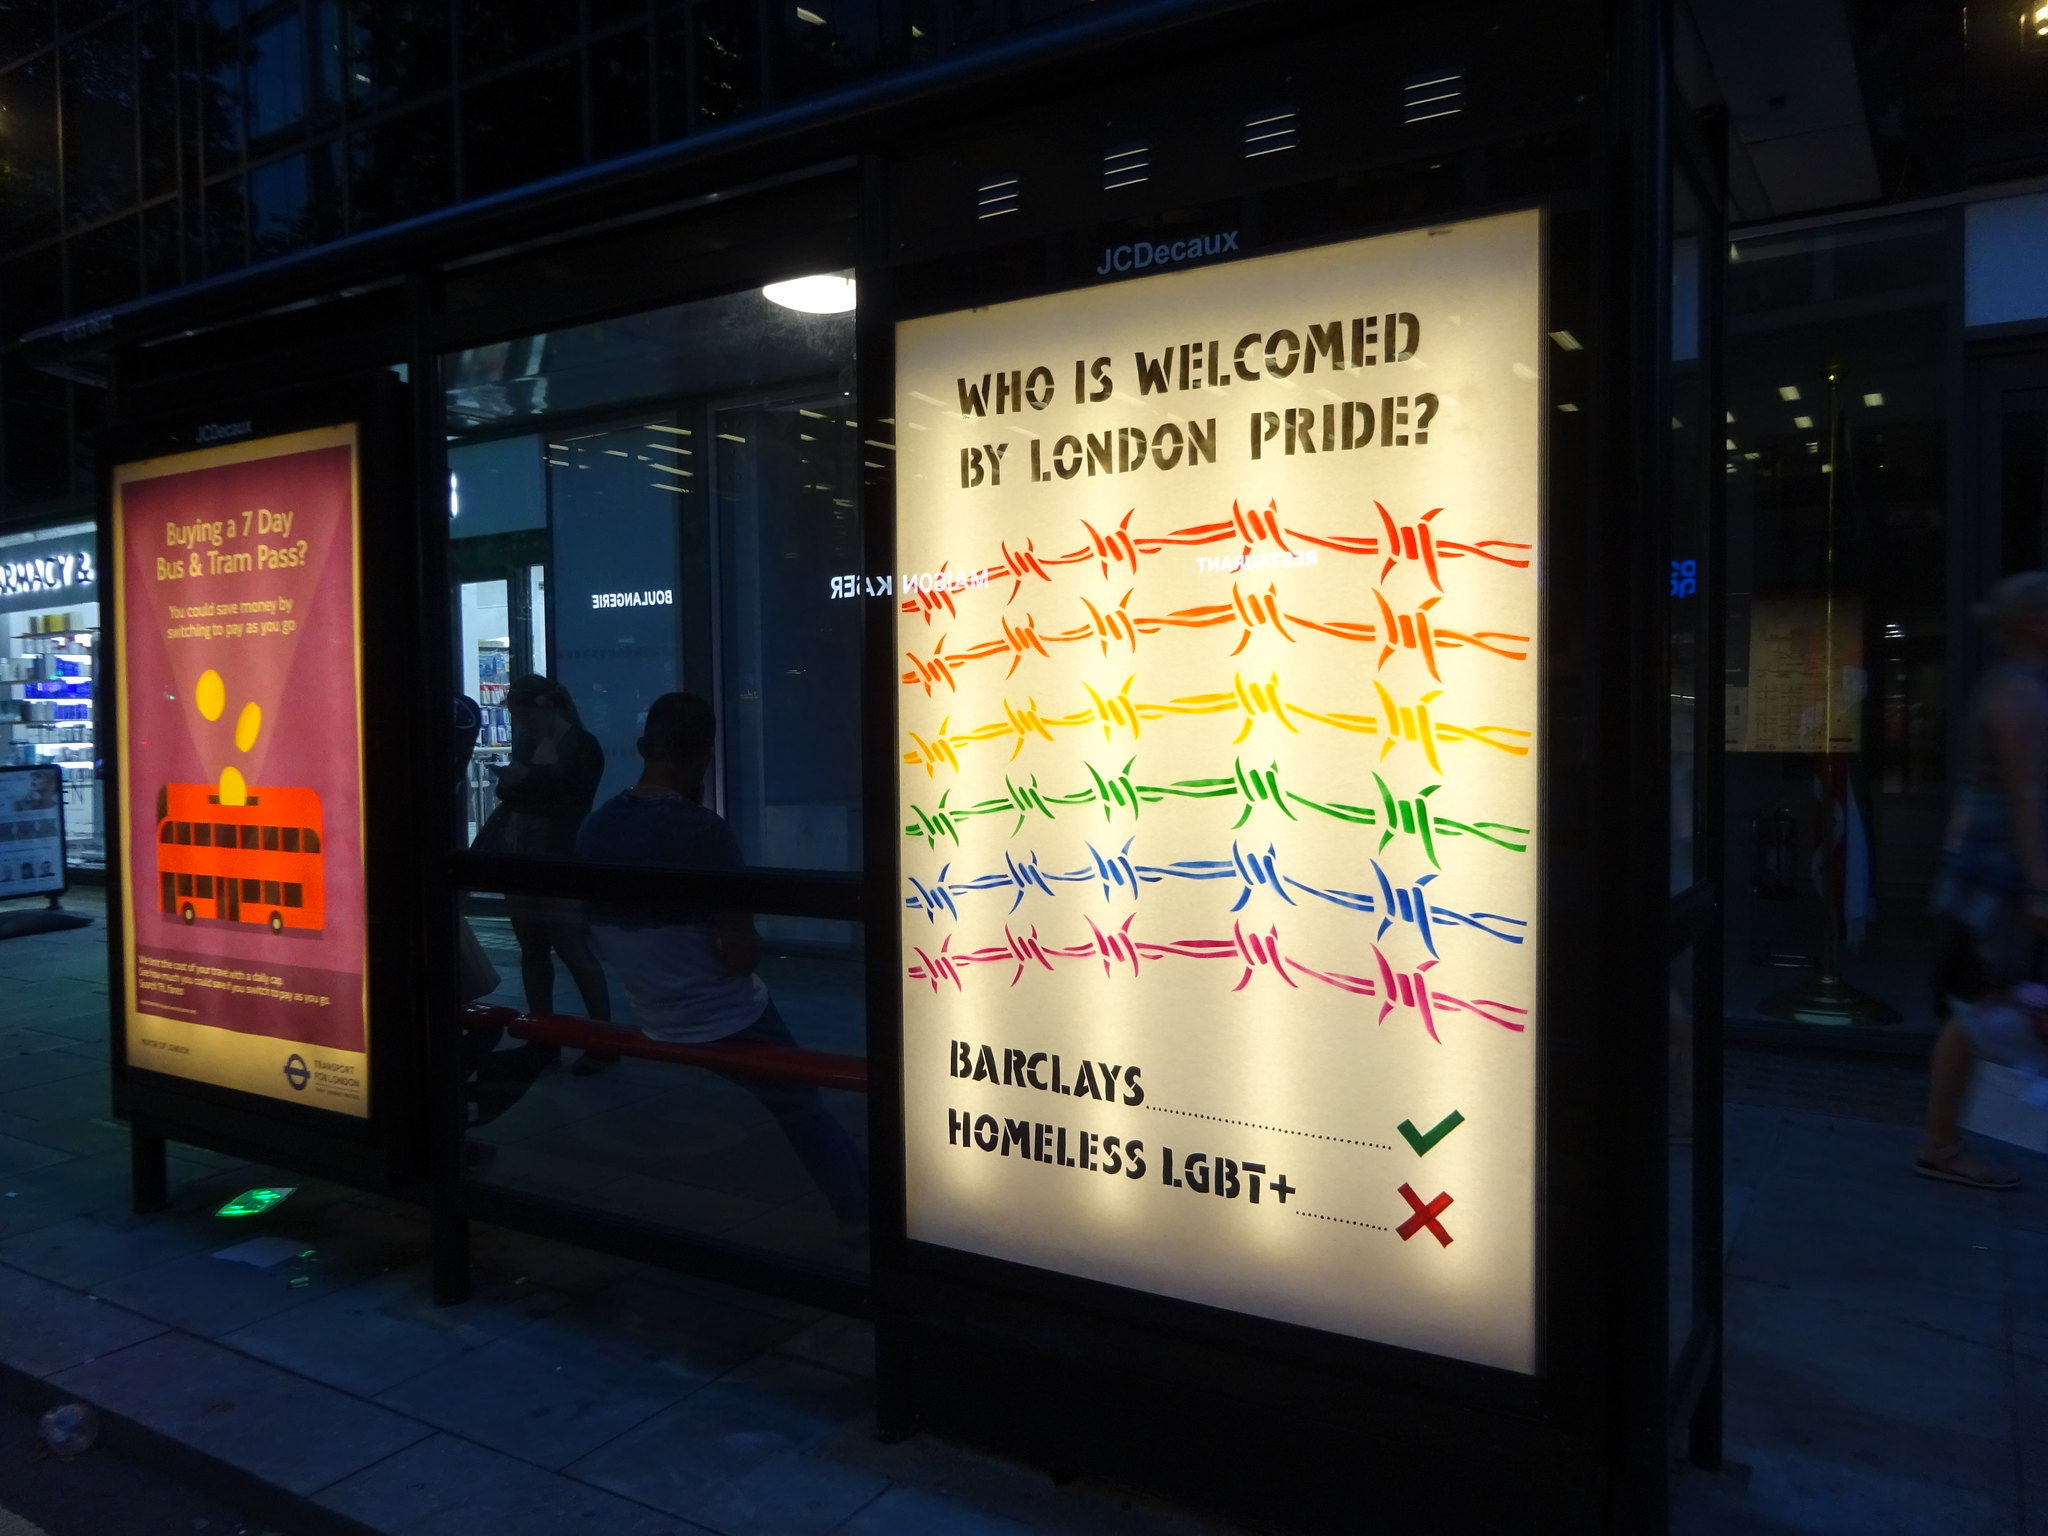 Bus stop adhack by Lesbians and Gays Support the Migrants and Protest Stencil protesting the exclusion of LGBT+ asylum seekers, homeless people and community groups from Pride in London